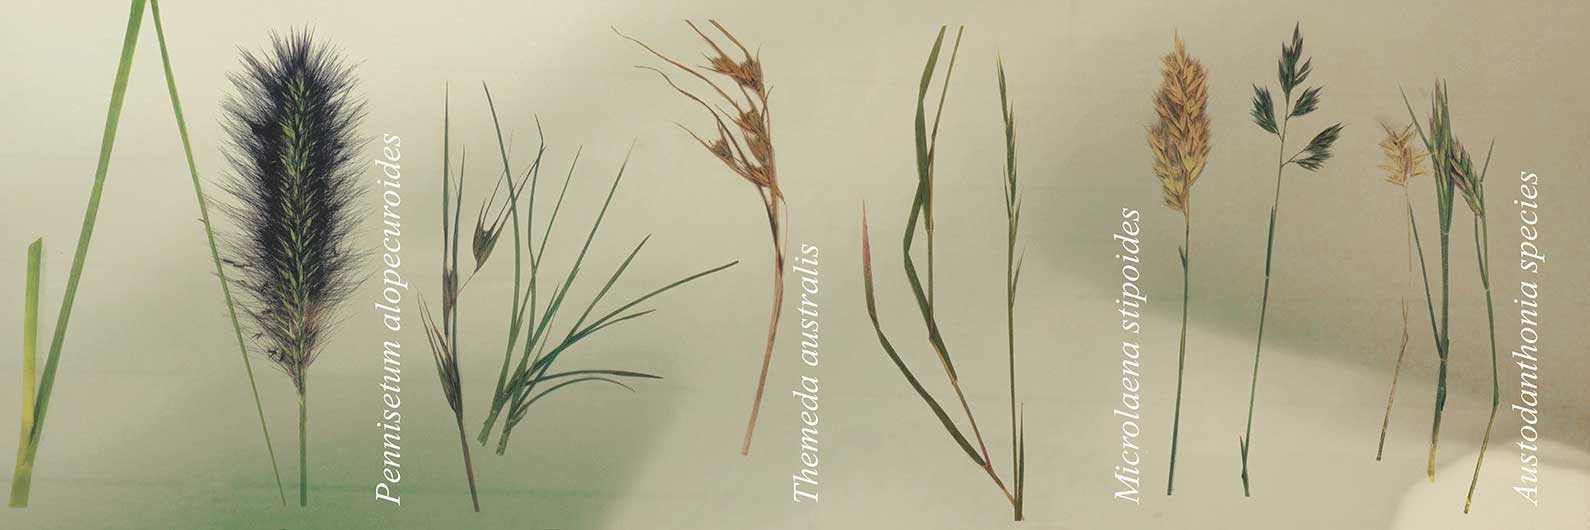 Illustrations of native Australian grasses adjacent to printed text presumably their scientific name. - click to view larger image